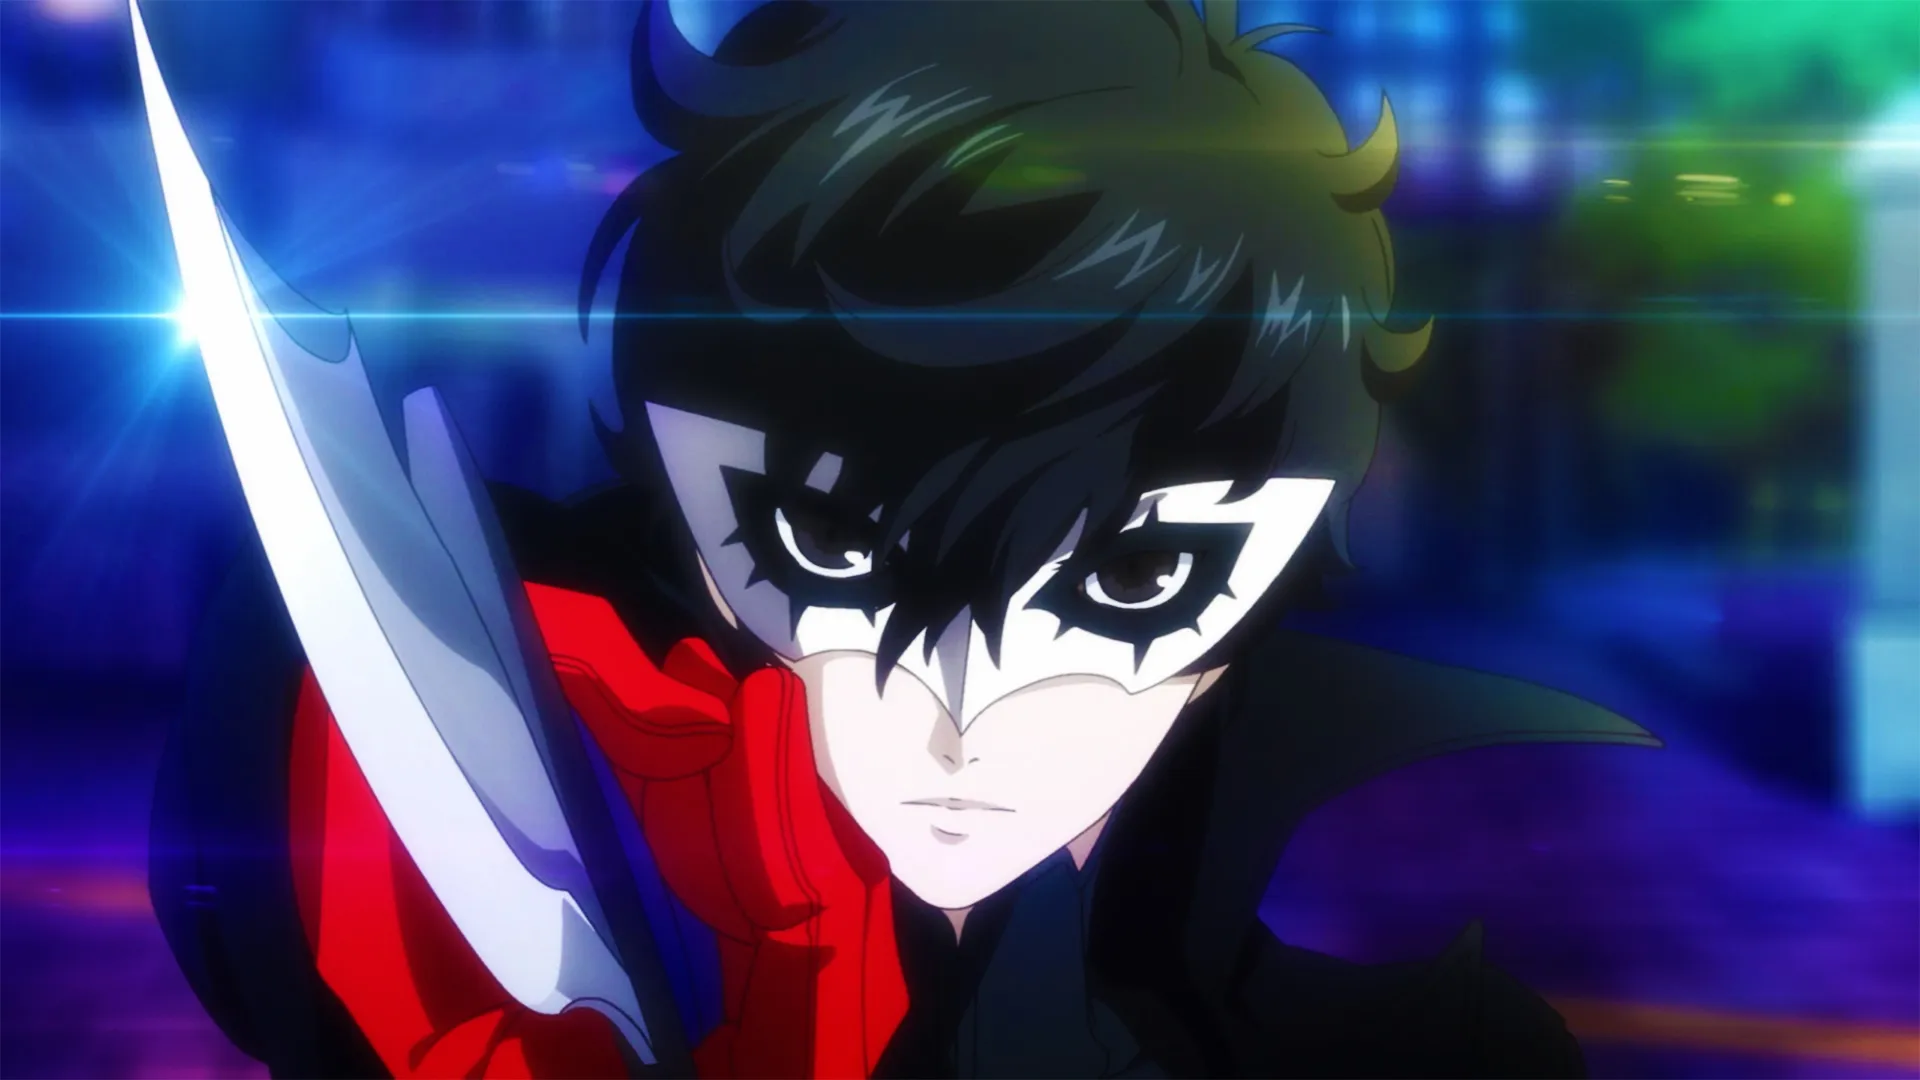 New Persona 5 Strikers Preview involves ‘Liberating Hearts’